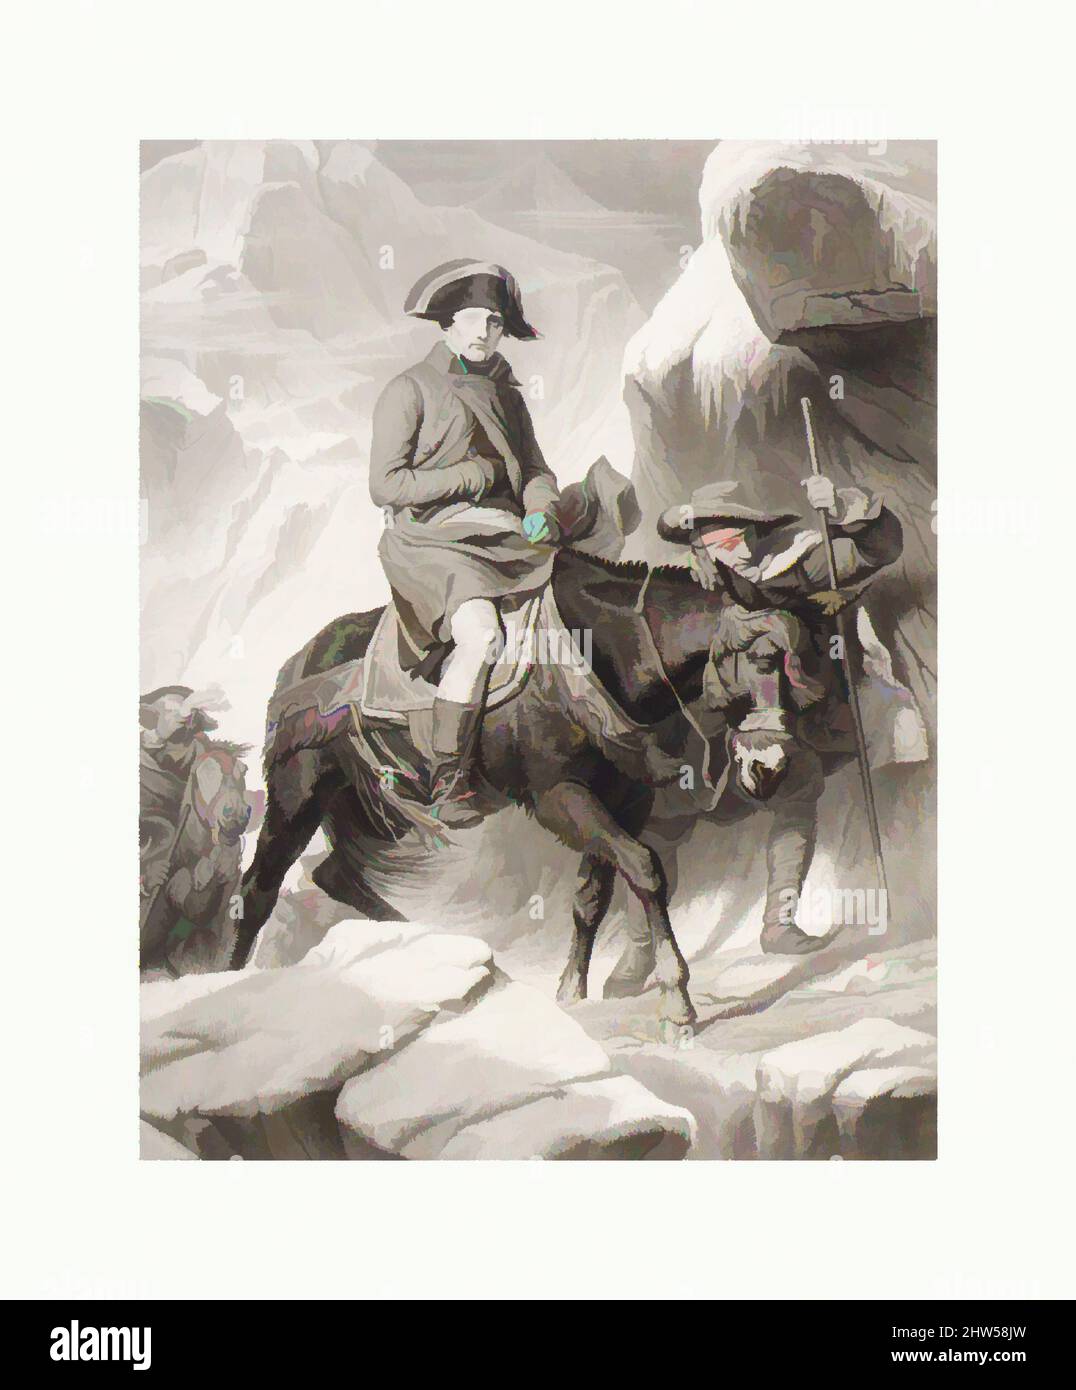 Art inspired by Napoleon Crossing the Alps, 1851, Engraving; proof before letters, image: 24 7/8 x 19 7/16 in. (63.2 x 49.4 cm), Prints, Alphonse François (French, Paris 1814–1888 Paris), After Paul (Hippolyte) Delaroche (French, Paris 1797–1856 Paris, Classic works modernized by Artotop with a splash of modernity. Shapes, color and value, eye-catching visual impact on art. Emotions through freedom of artworks in a contemporary way. A timeless message pursuing a wildly creative new direction. Artists turning to the digital medium and creating the Artotop NFT Stock Photo